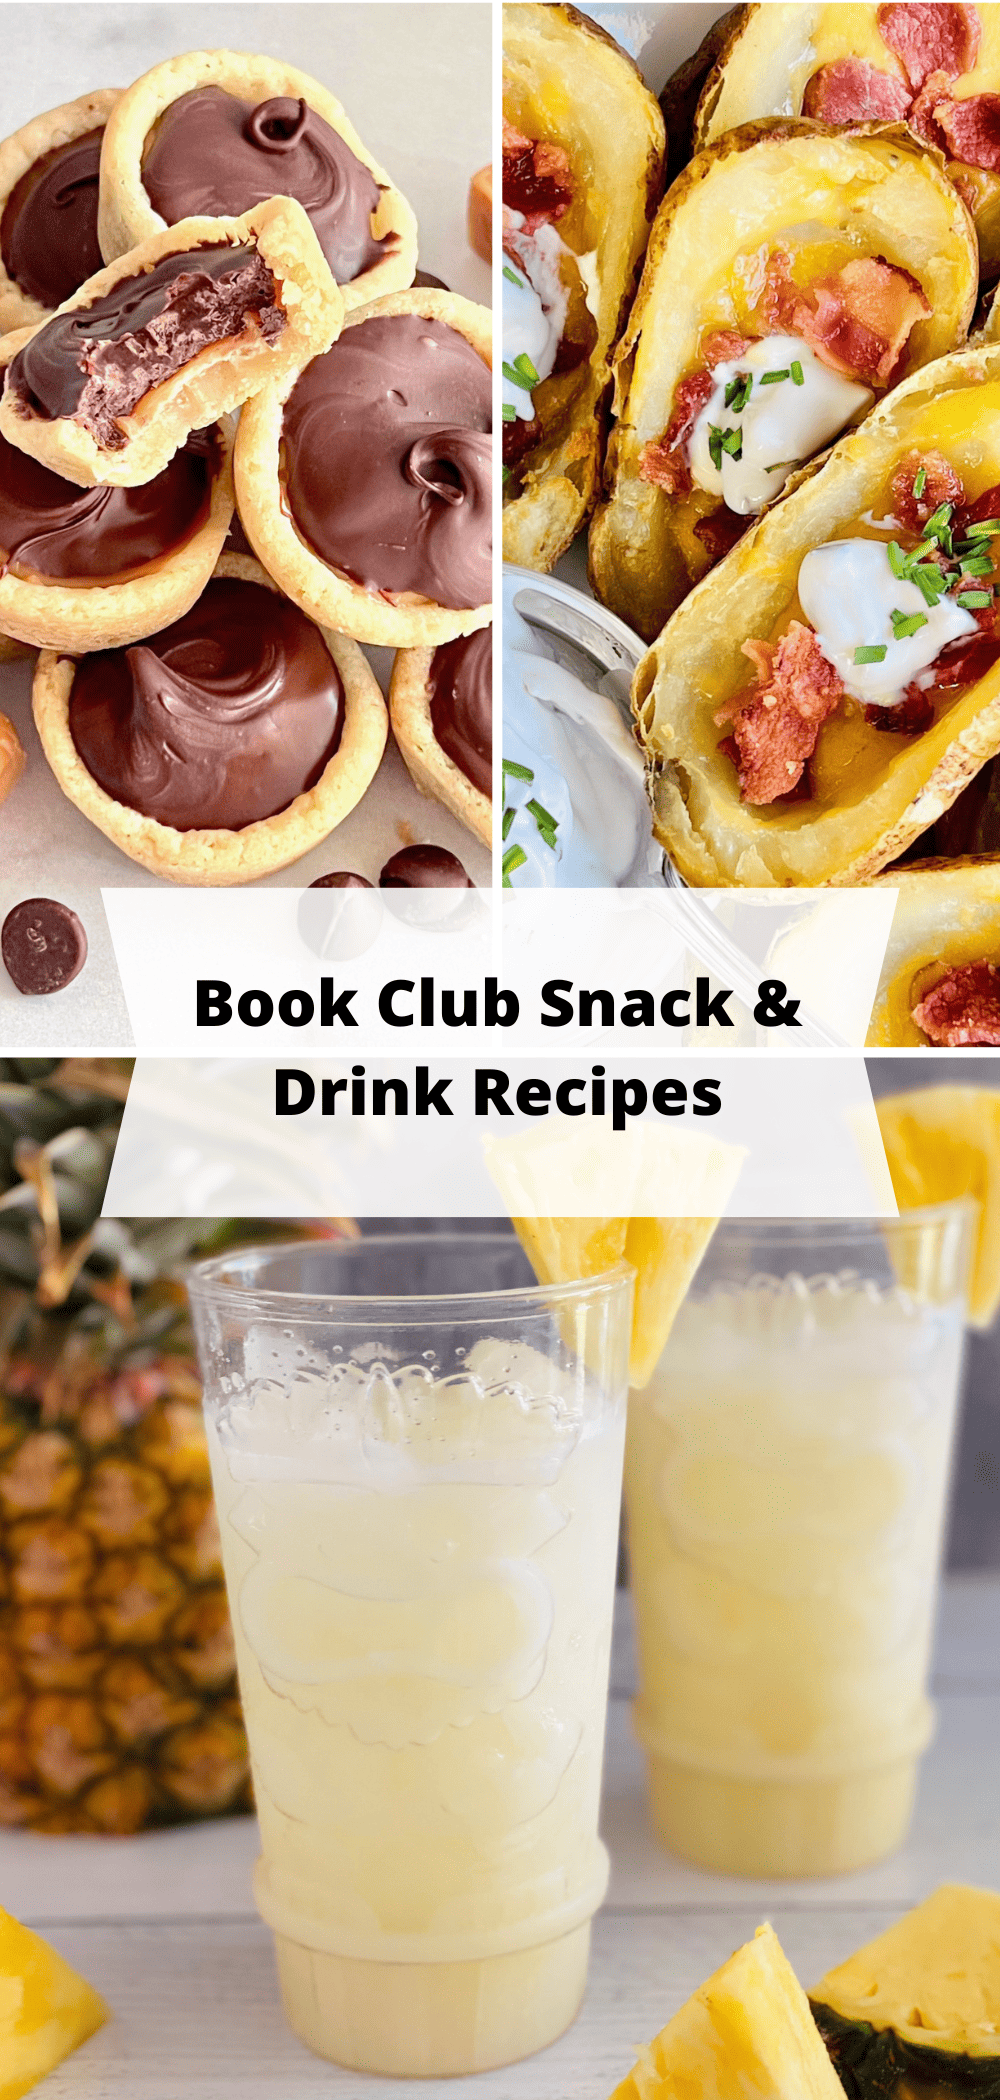 Book Club Snack & Drink Recipes 3 collage pictures.